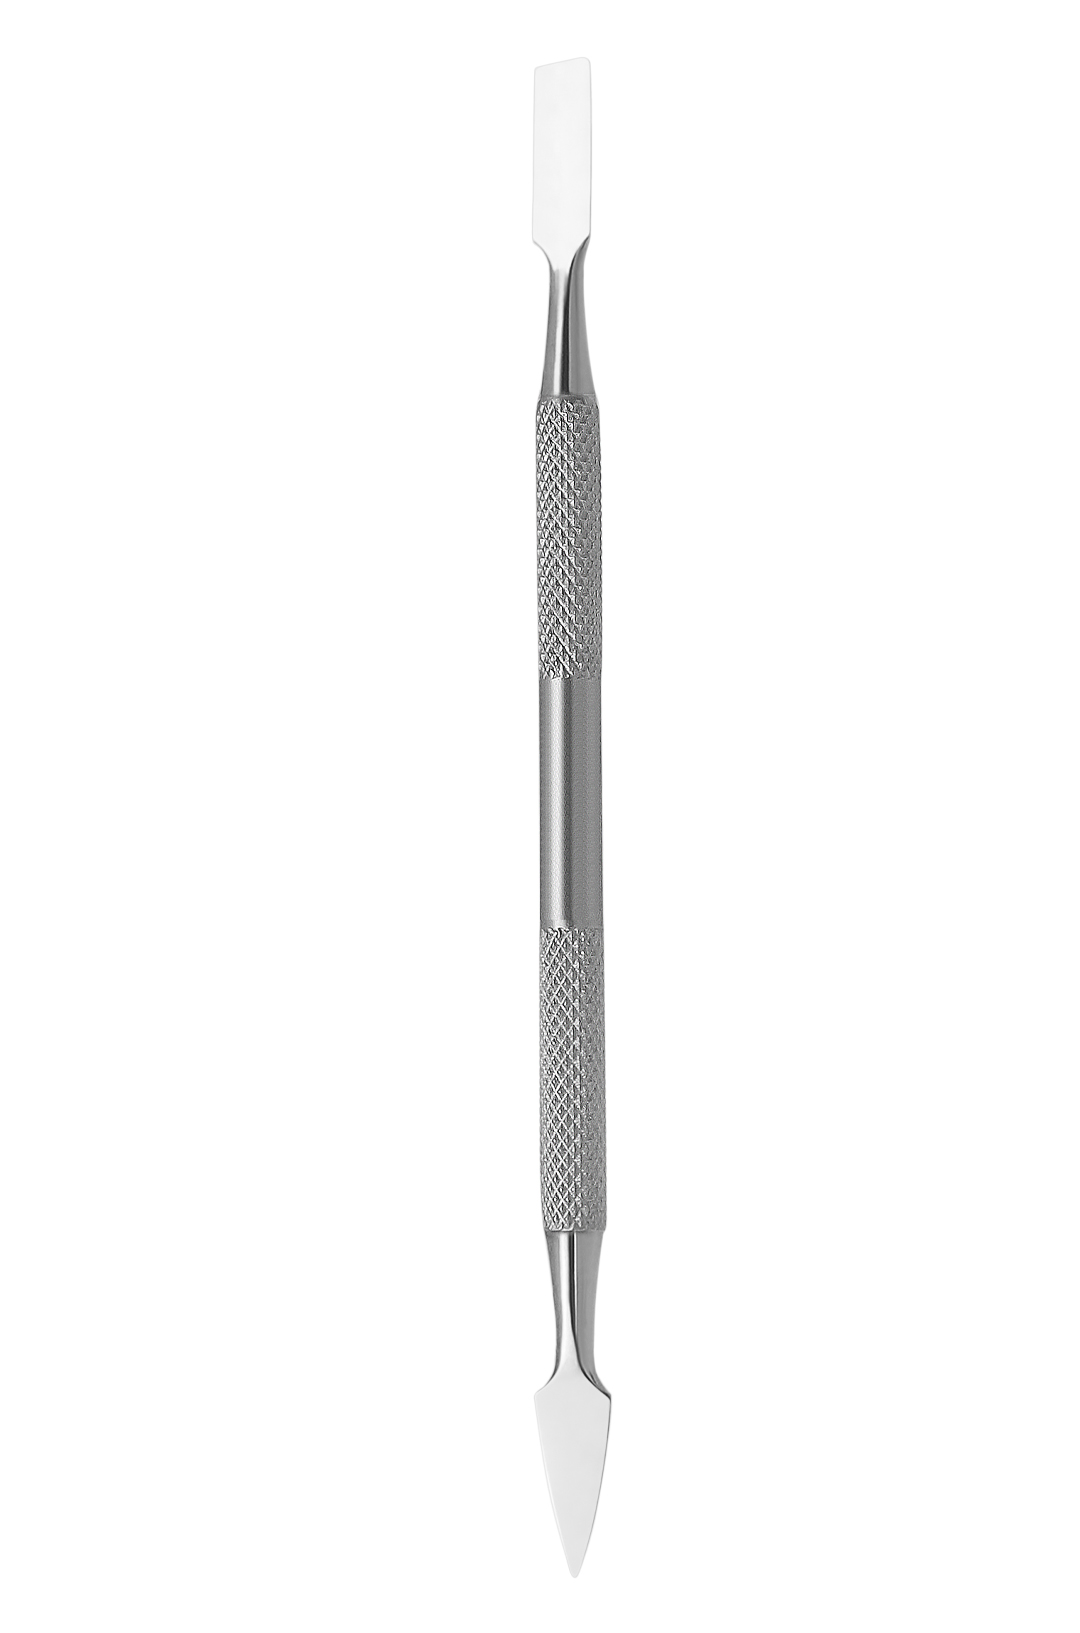 Excellent cuticle pusher & spatula